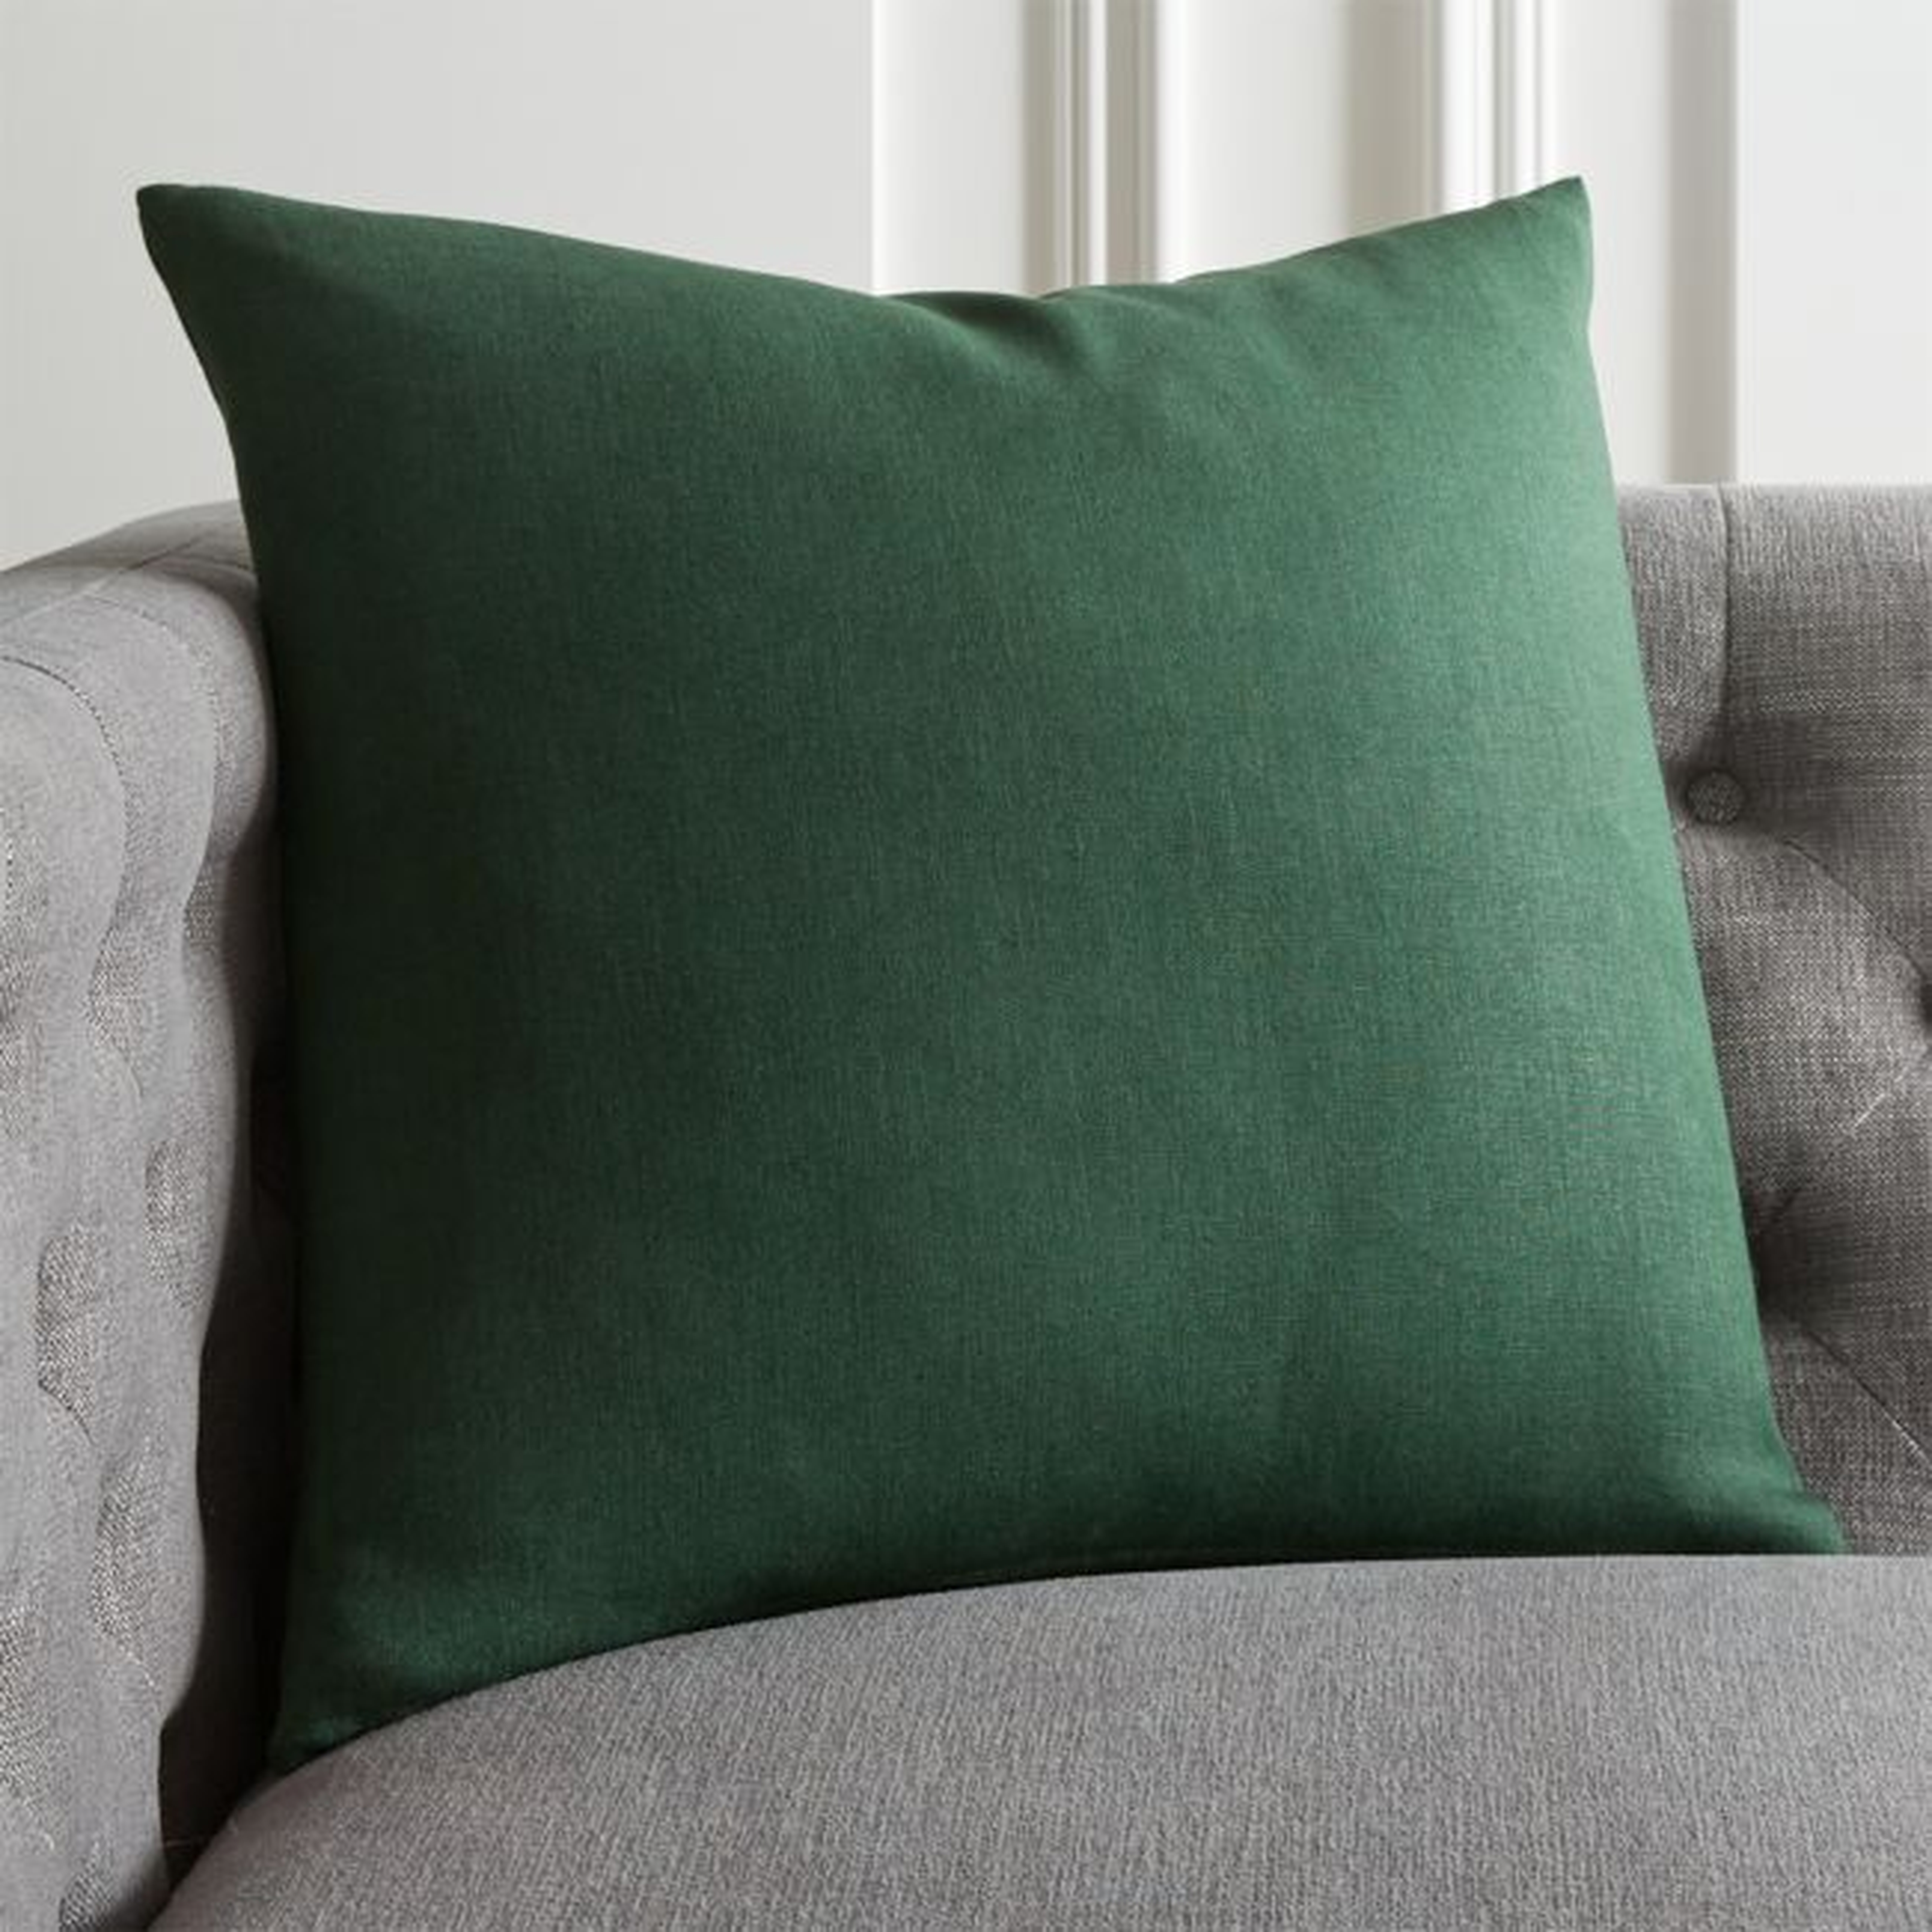 20" Linon Evergreen Pillow with Feather-Down Insert - CB2